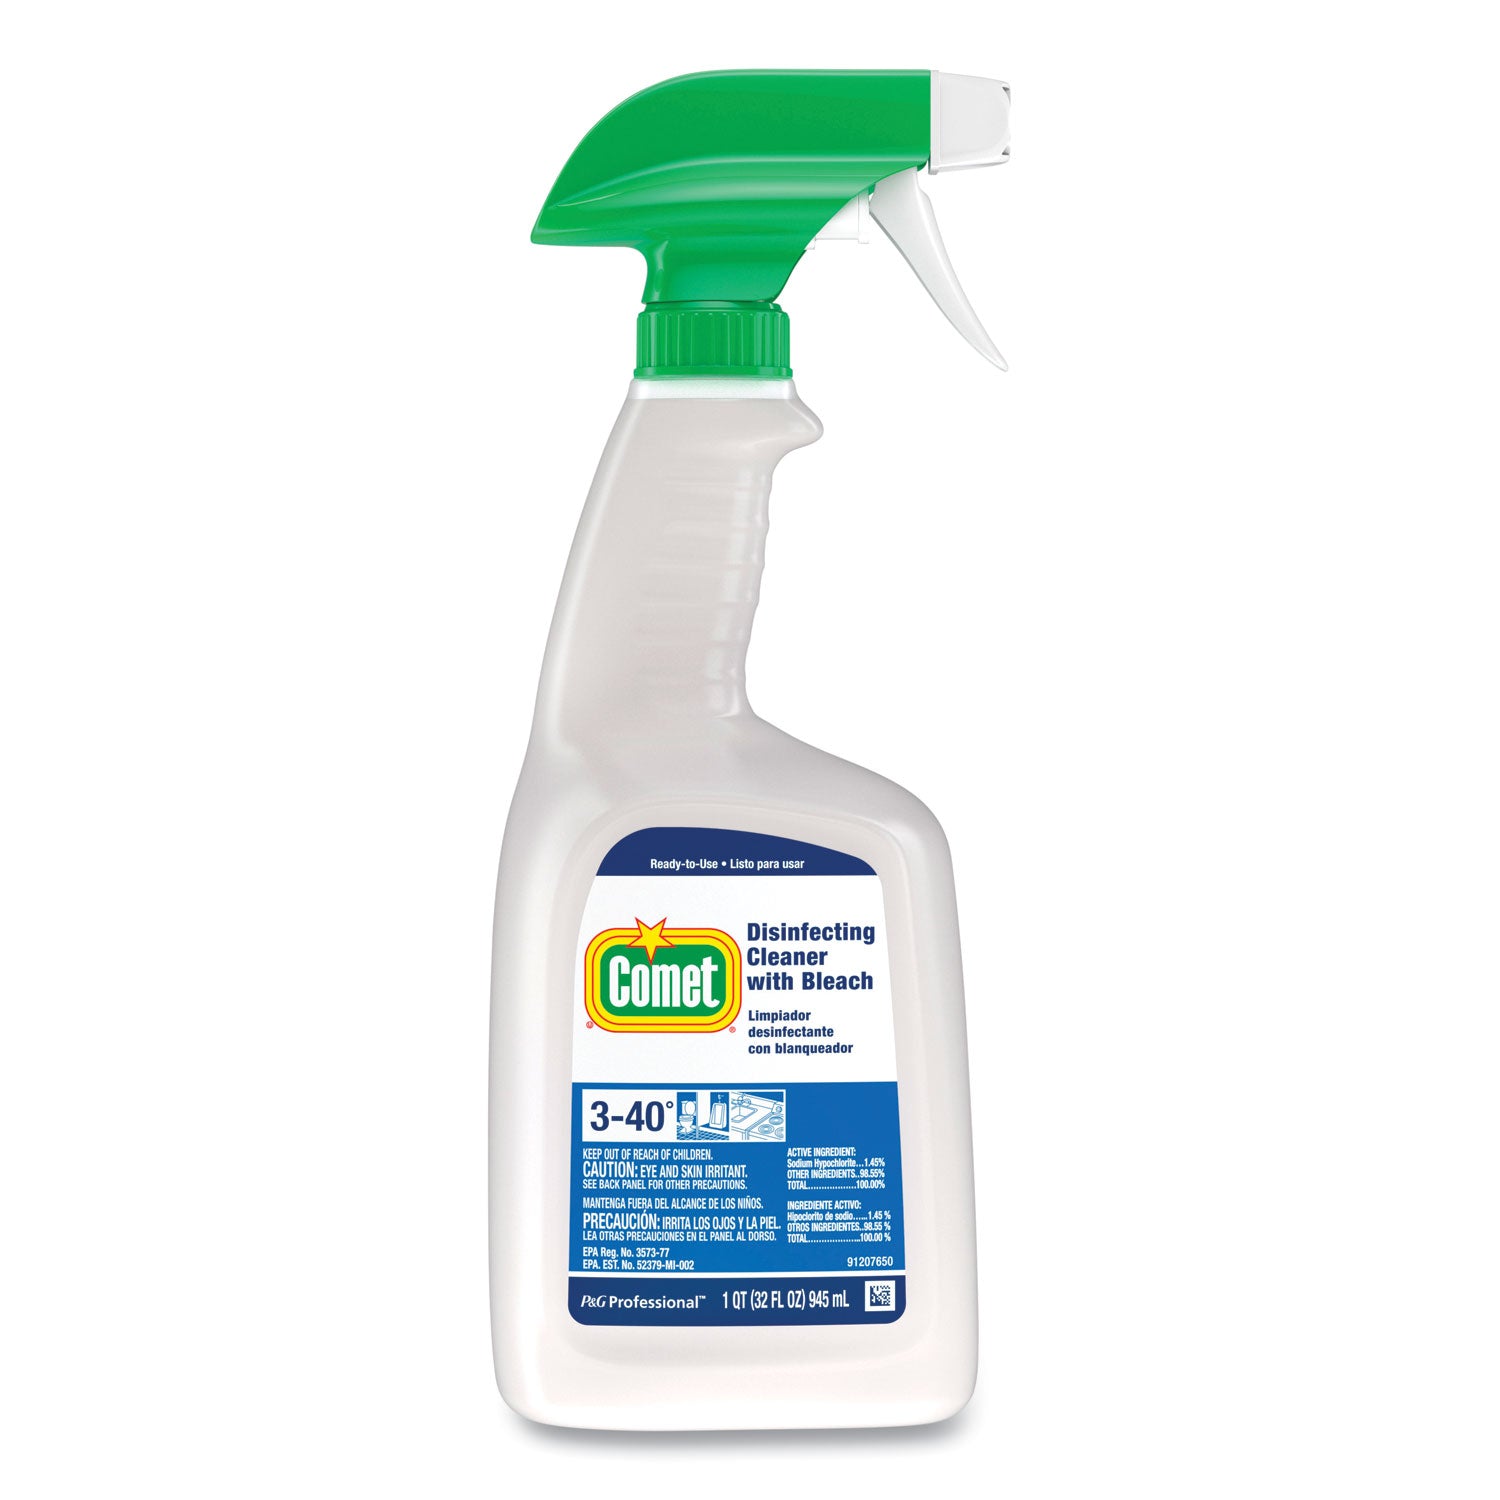 disinfecting-cleaner-with-bleach-32-oz-plastic-spray-bottle-fresh-scent-6-carton_pgc75350 - 2